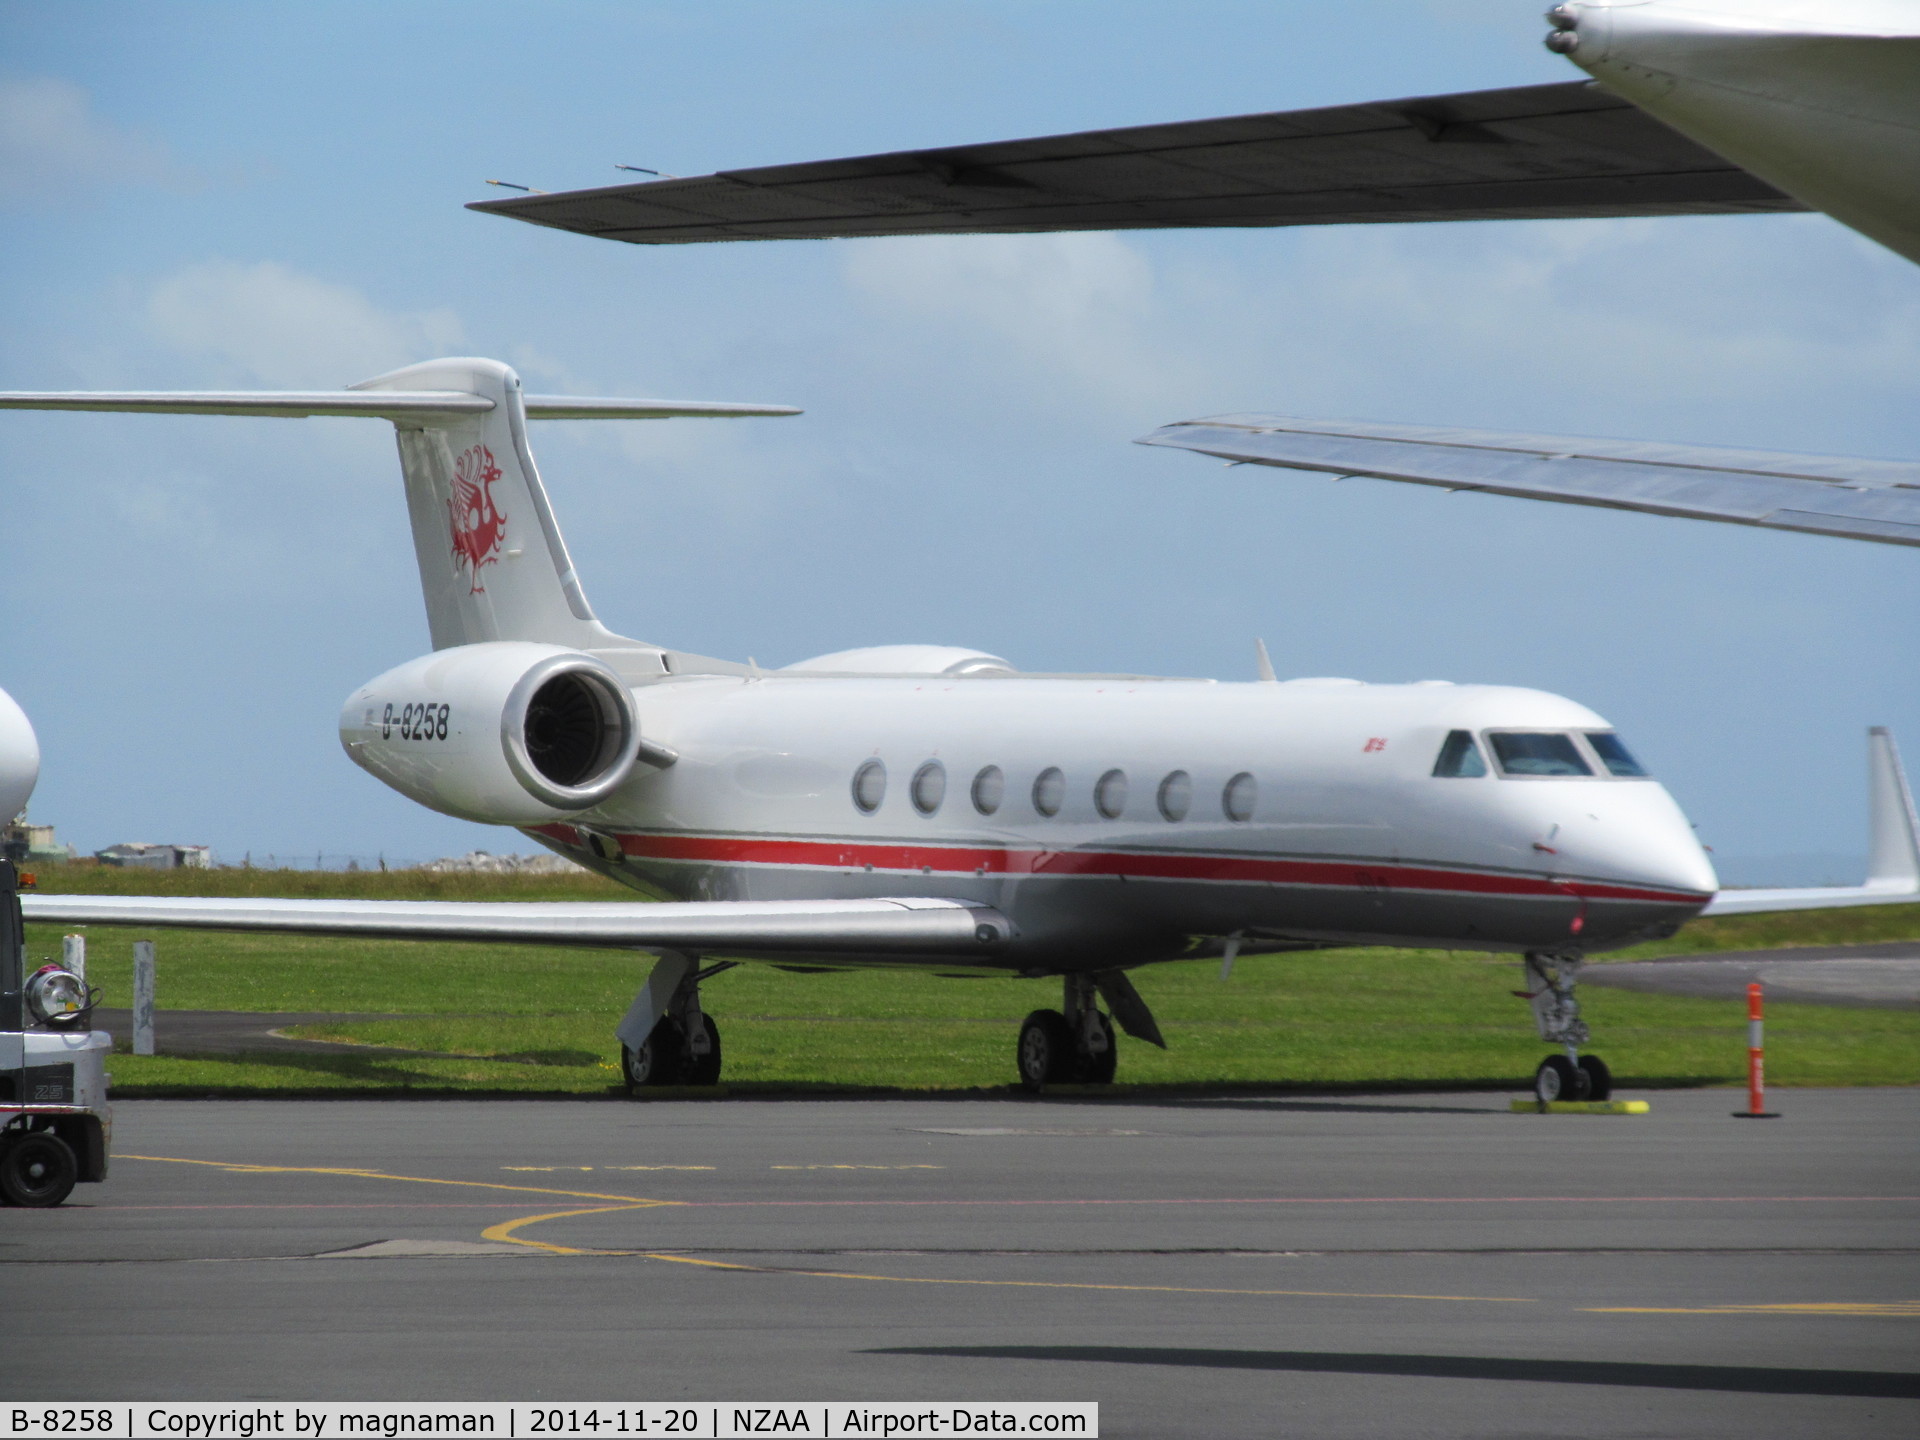 B-8258, Gulfstream Aerospace GV-SP (G550) C/N 5360, one of five Chinese visitors in NZ for president visit